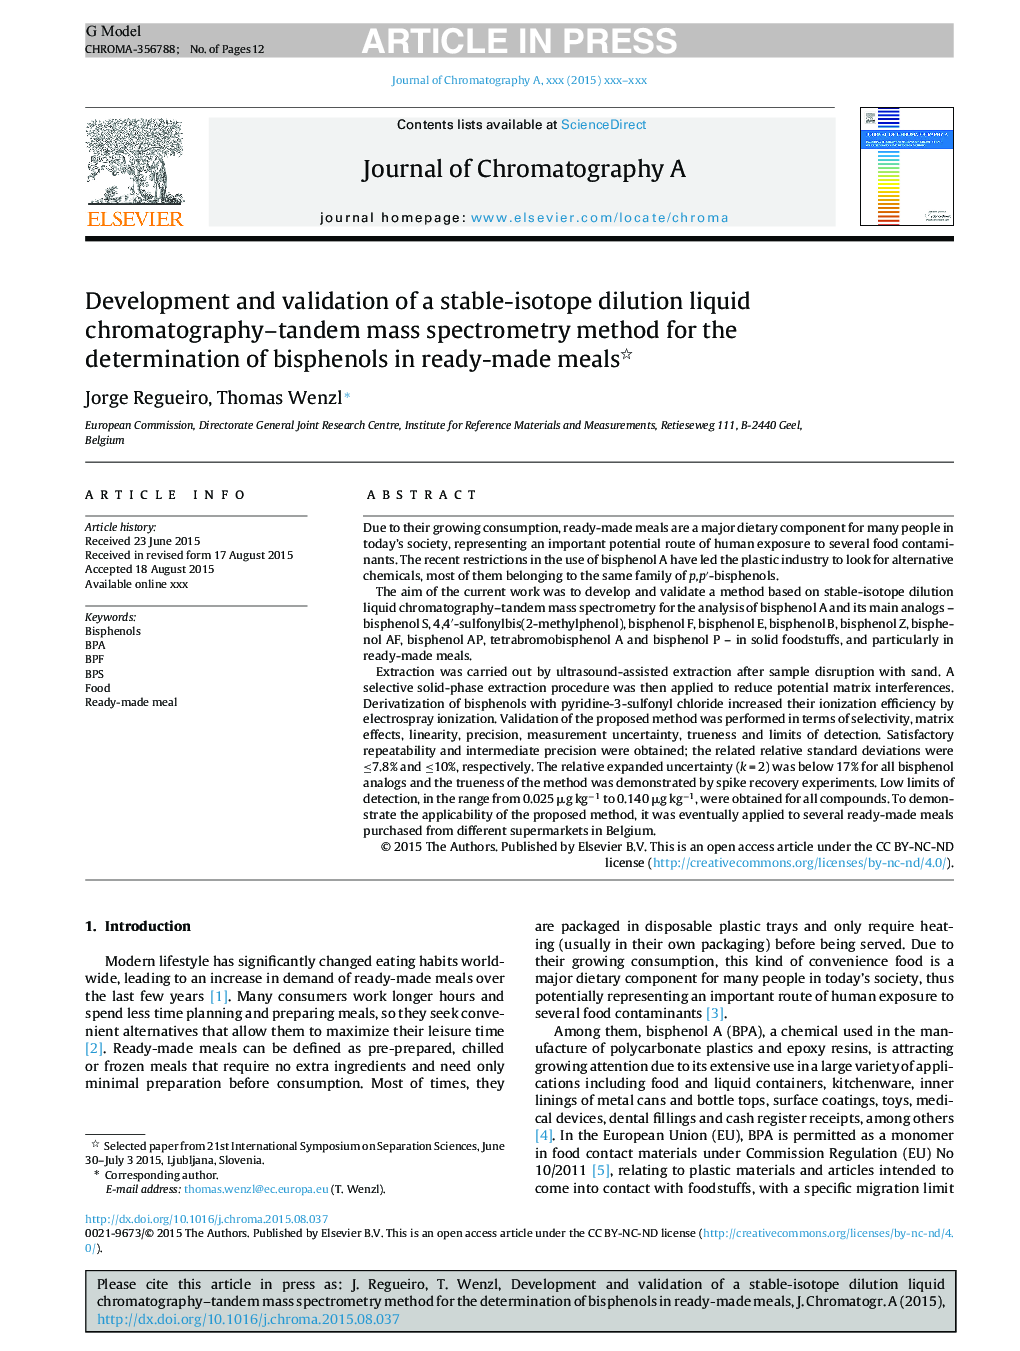 Development and validation of a stable-isotope dilution liquid chromatography-tandem mass spectrometry method for the determination of bisphenols in ready-made meals